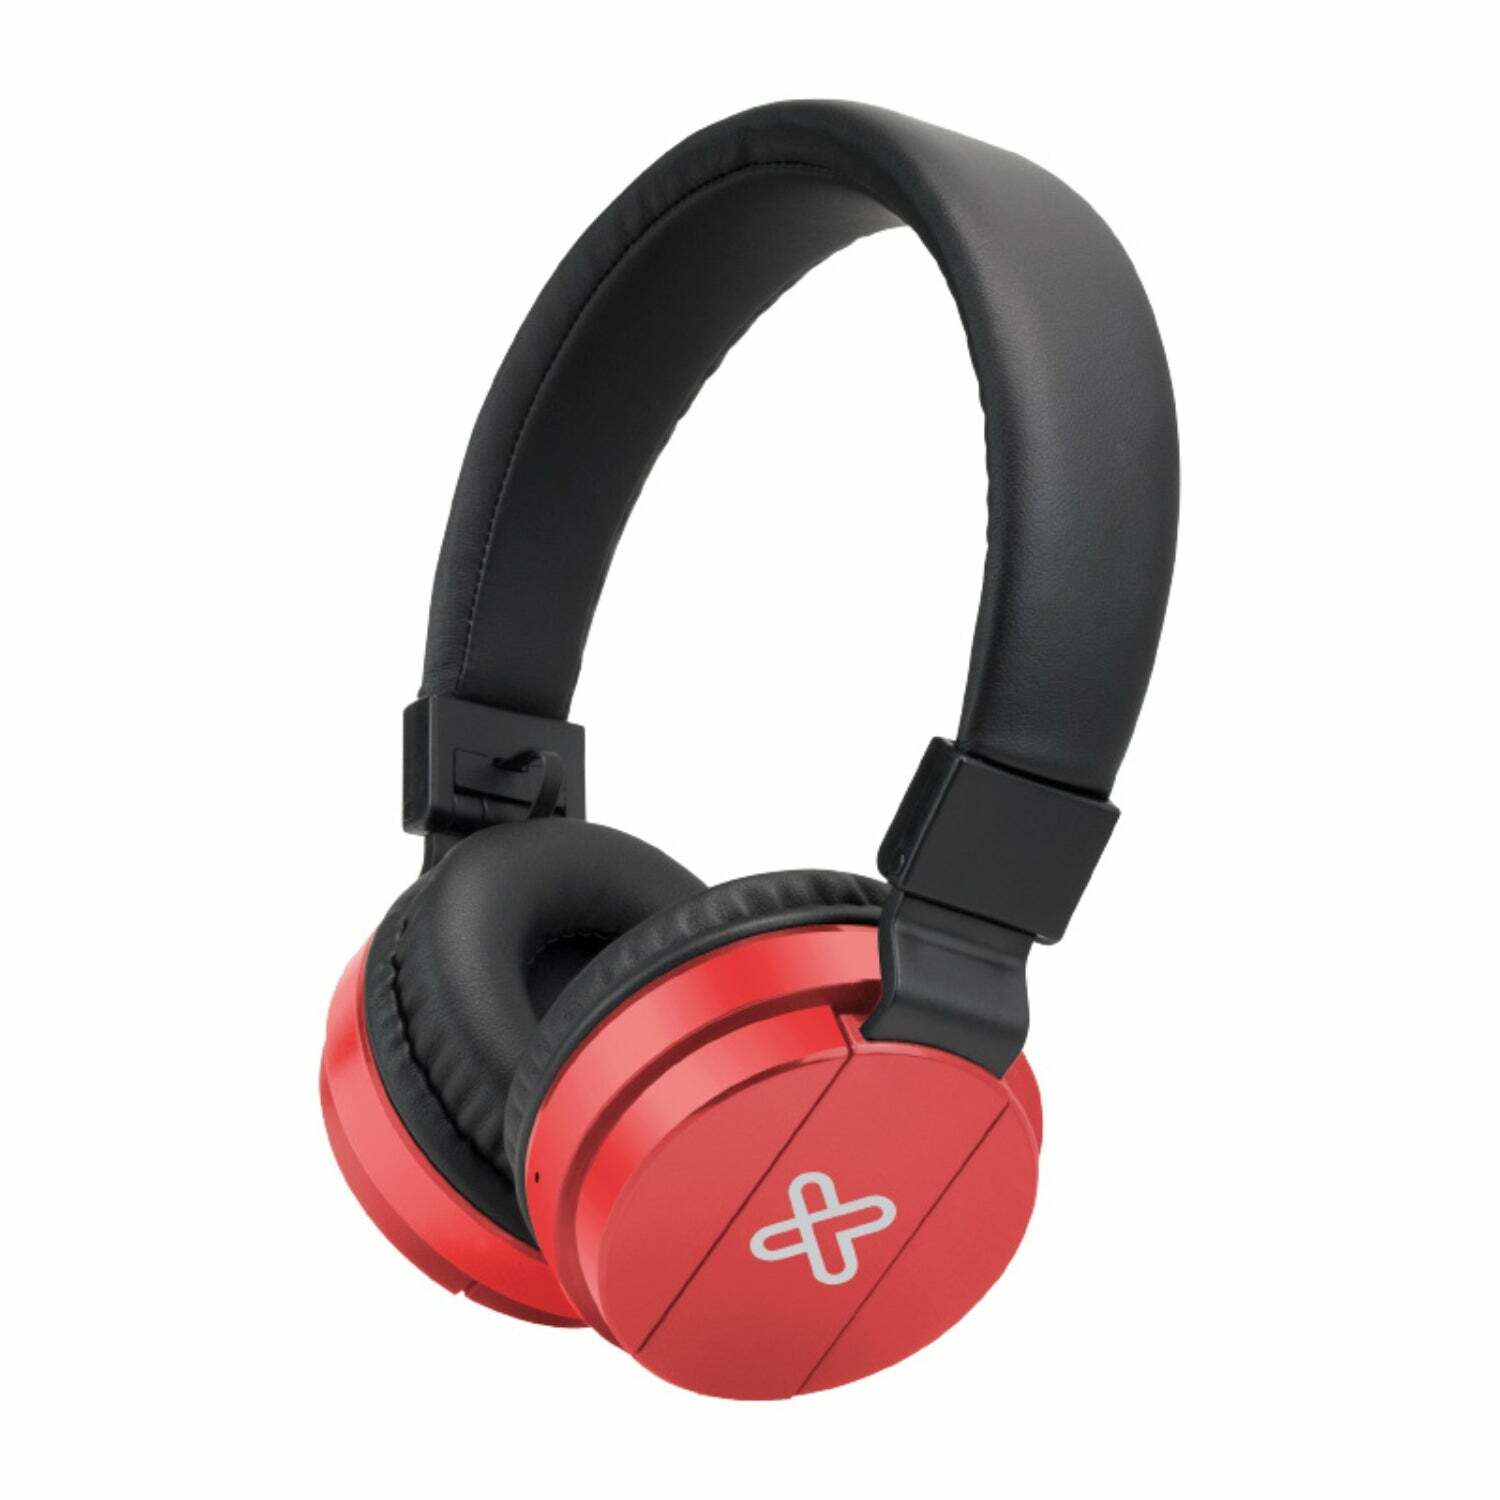 Klip Xtreme Fury PRO KWH-001 Headphones with Wireless Bluetooth Technology - Red